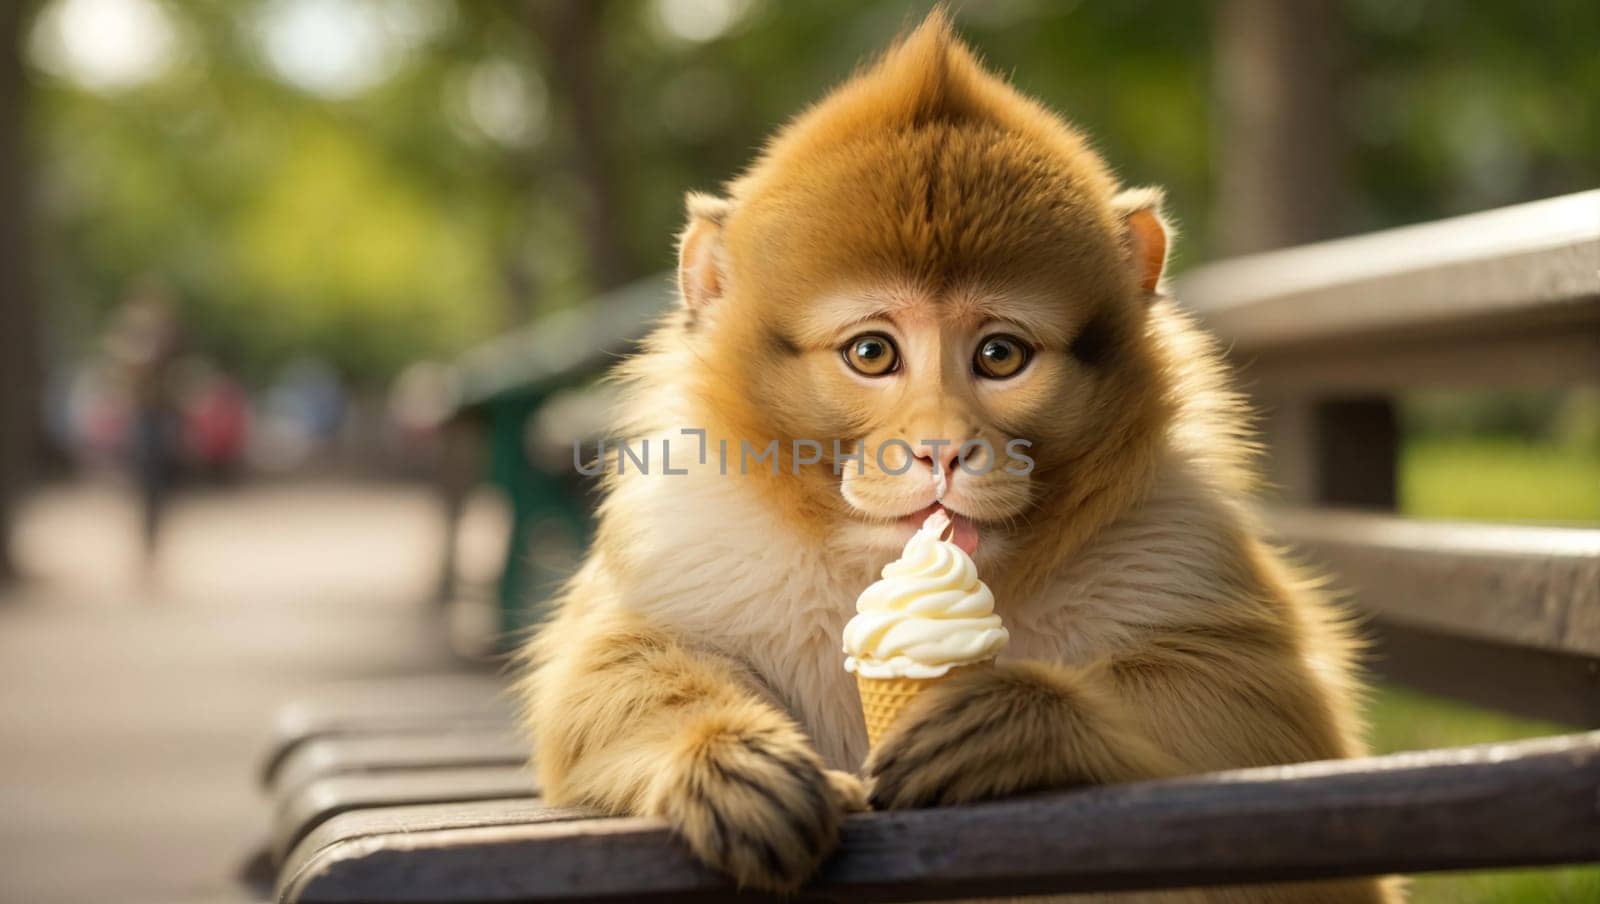 A smiling little monkey holding a yellow and white ice cream cone sits on a bench against a green park backdrop